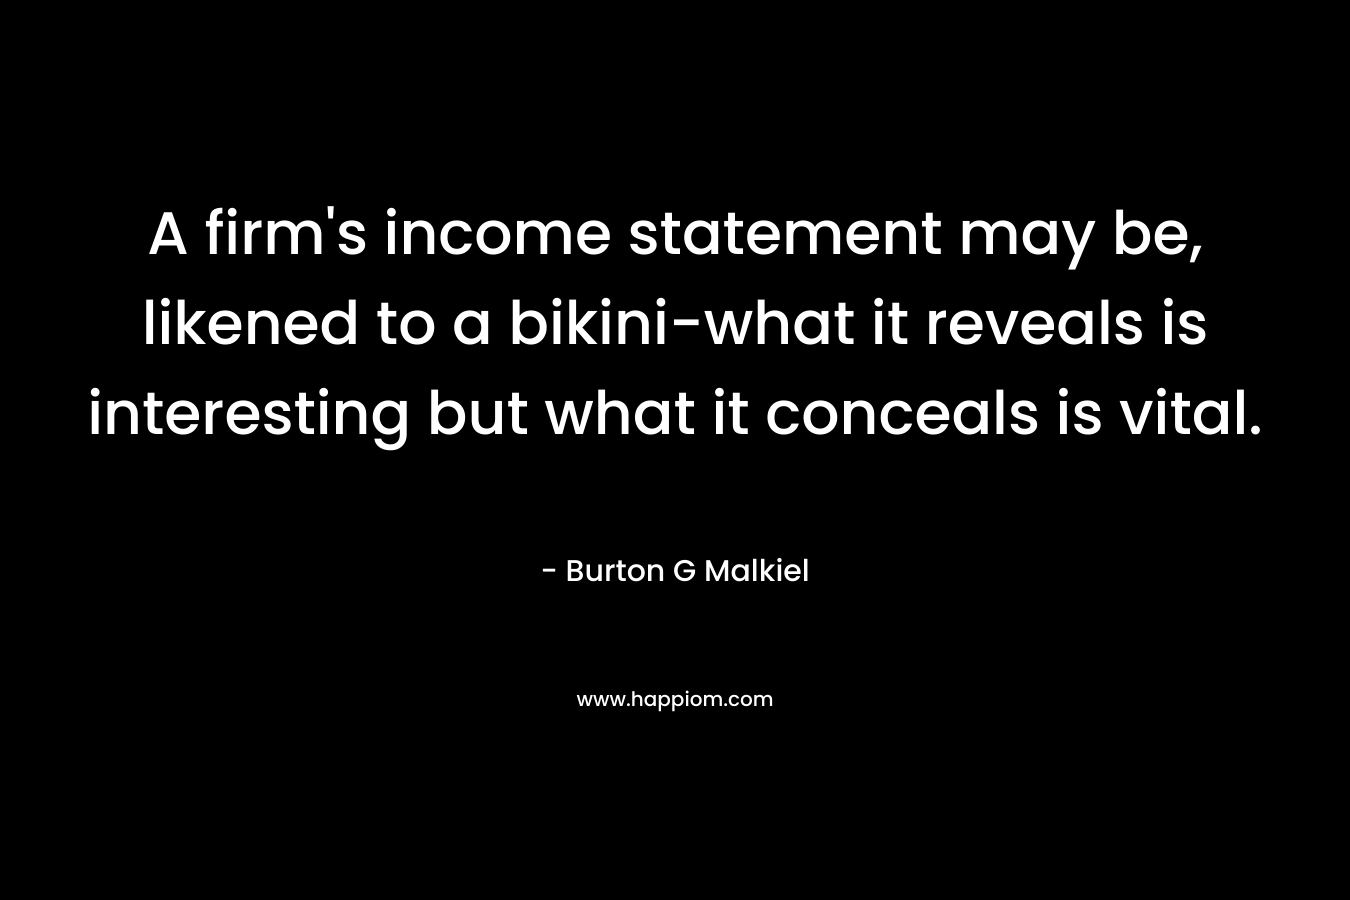 A firm’s income statement may be, likened to a bikini-what it reveals is interesting but what it conceals is vital. – Burton G Malkiel